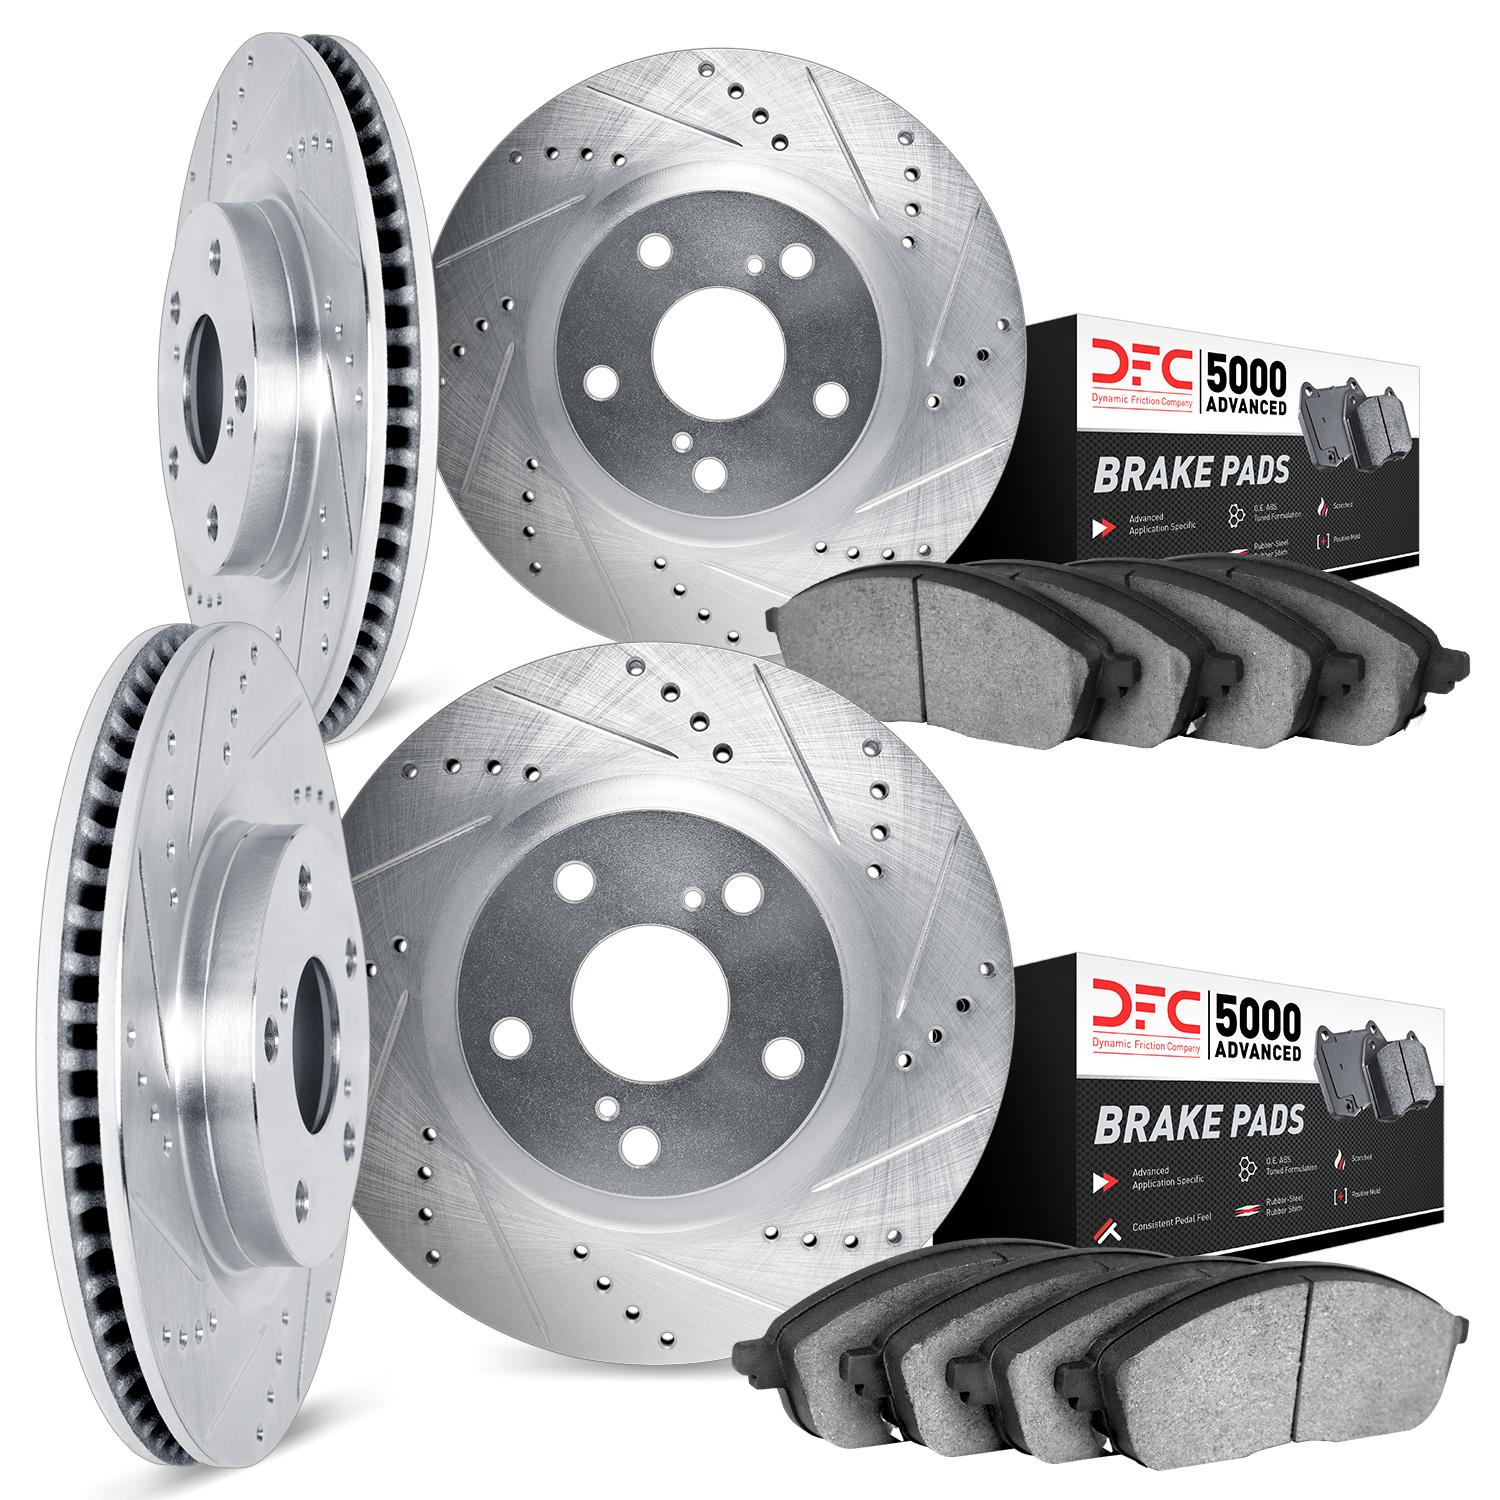 7504-20011 Drilled/Slotted Brake Rotors w/5000 Advanced Brake Pads Kit [Silver], 2006-2008 Jaguar, Position: Front and Rear